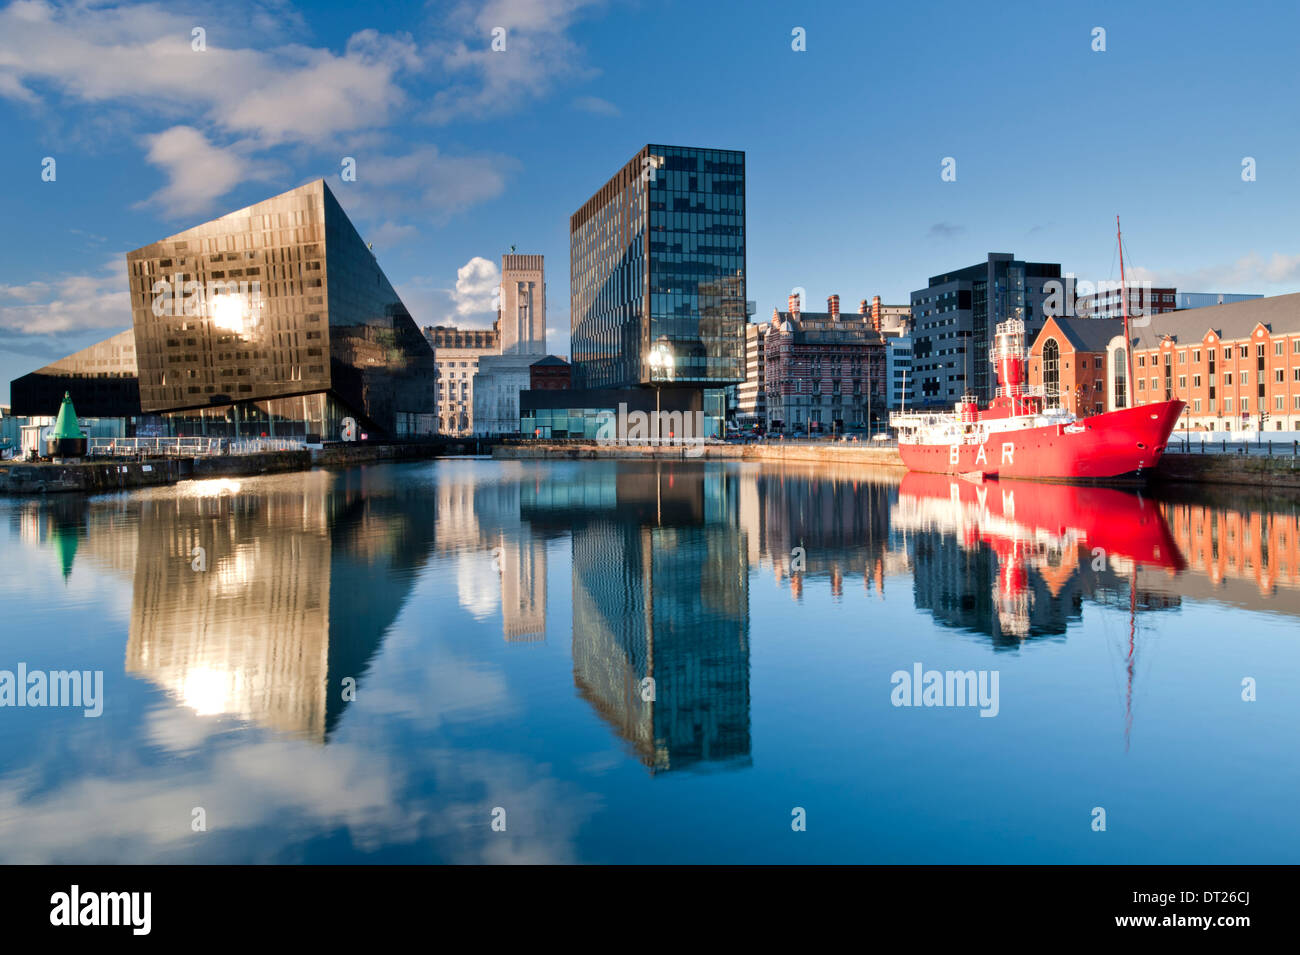 Modern Apartments, The Mersey Bar Lightship & Waterfront Buildings, Canning Dock, Liverpool, Merseyside, England, UK Stock Photo